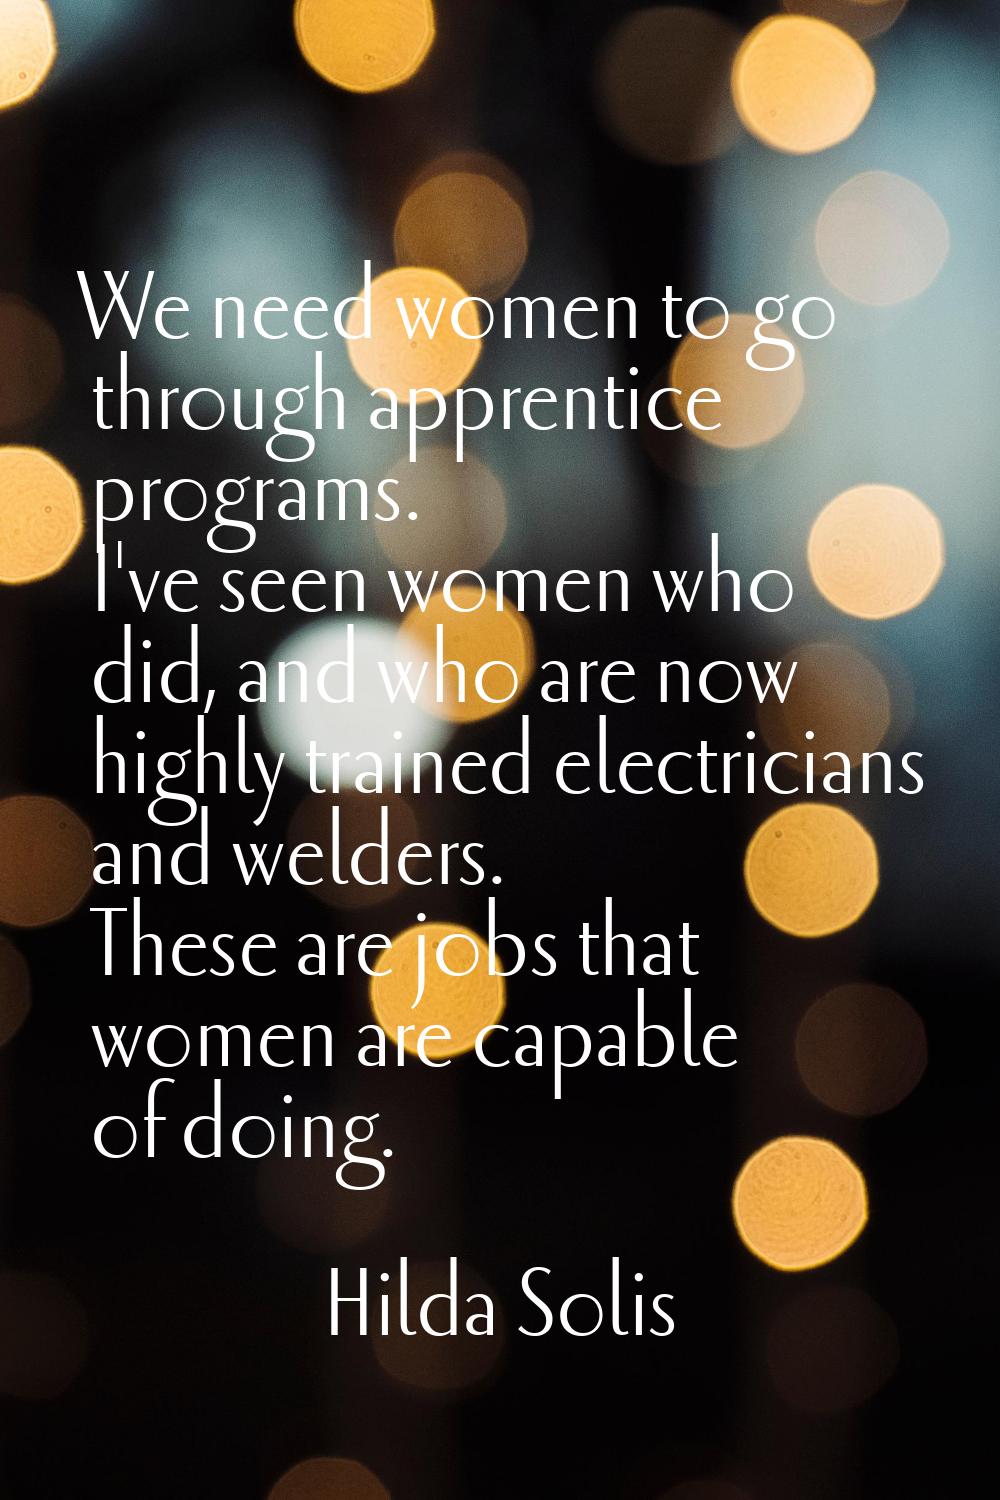 We need women to go through apprentice programs. I've seen women who did, and who are now highly tr